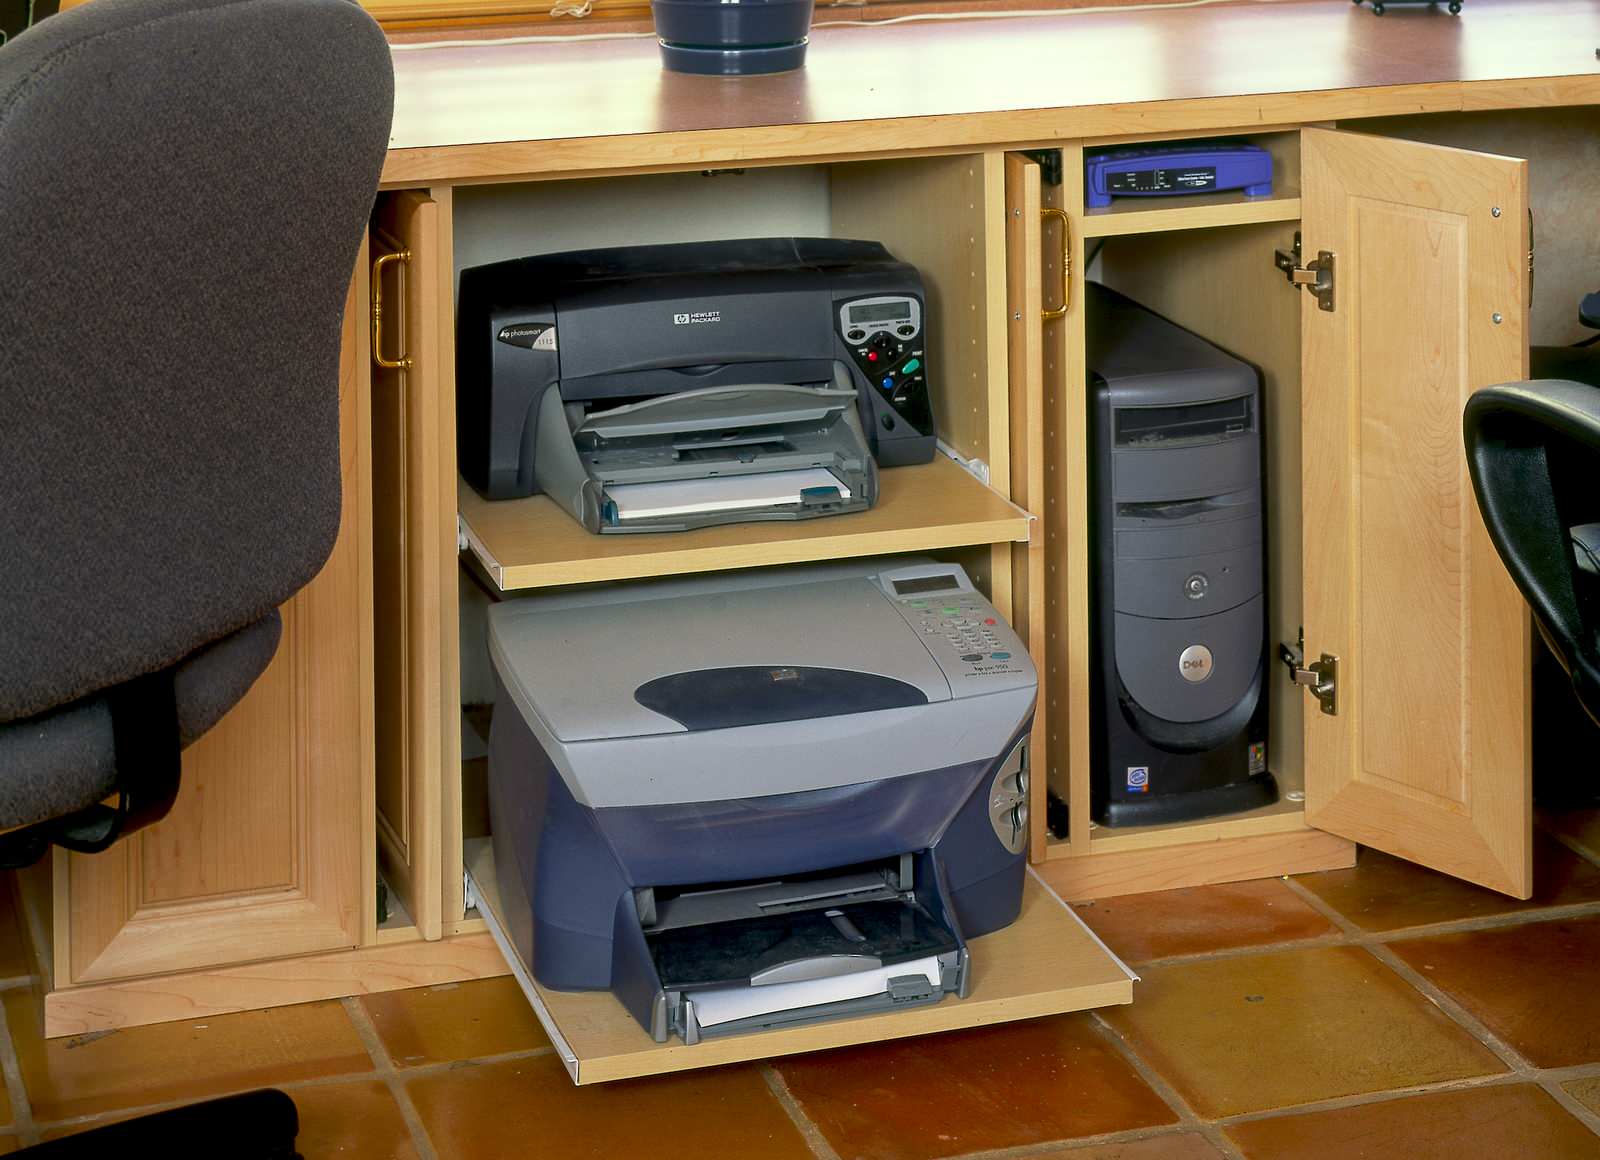 Slide Out Printer Shelf Houzz, Printer Cabinet With Pull Out Shelf